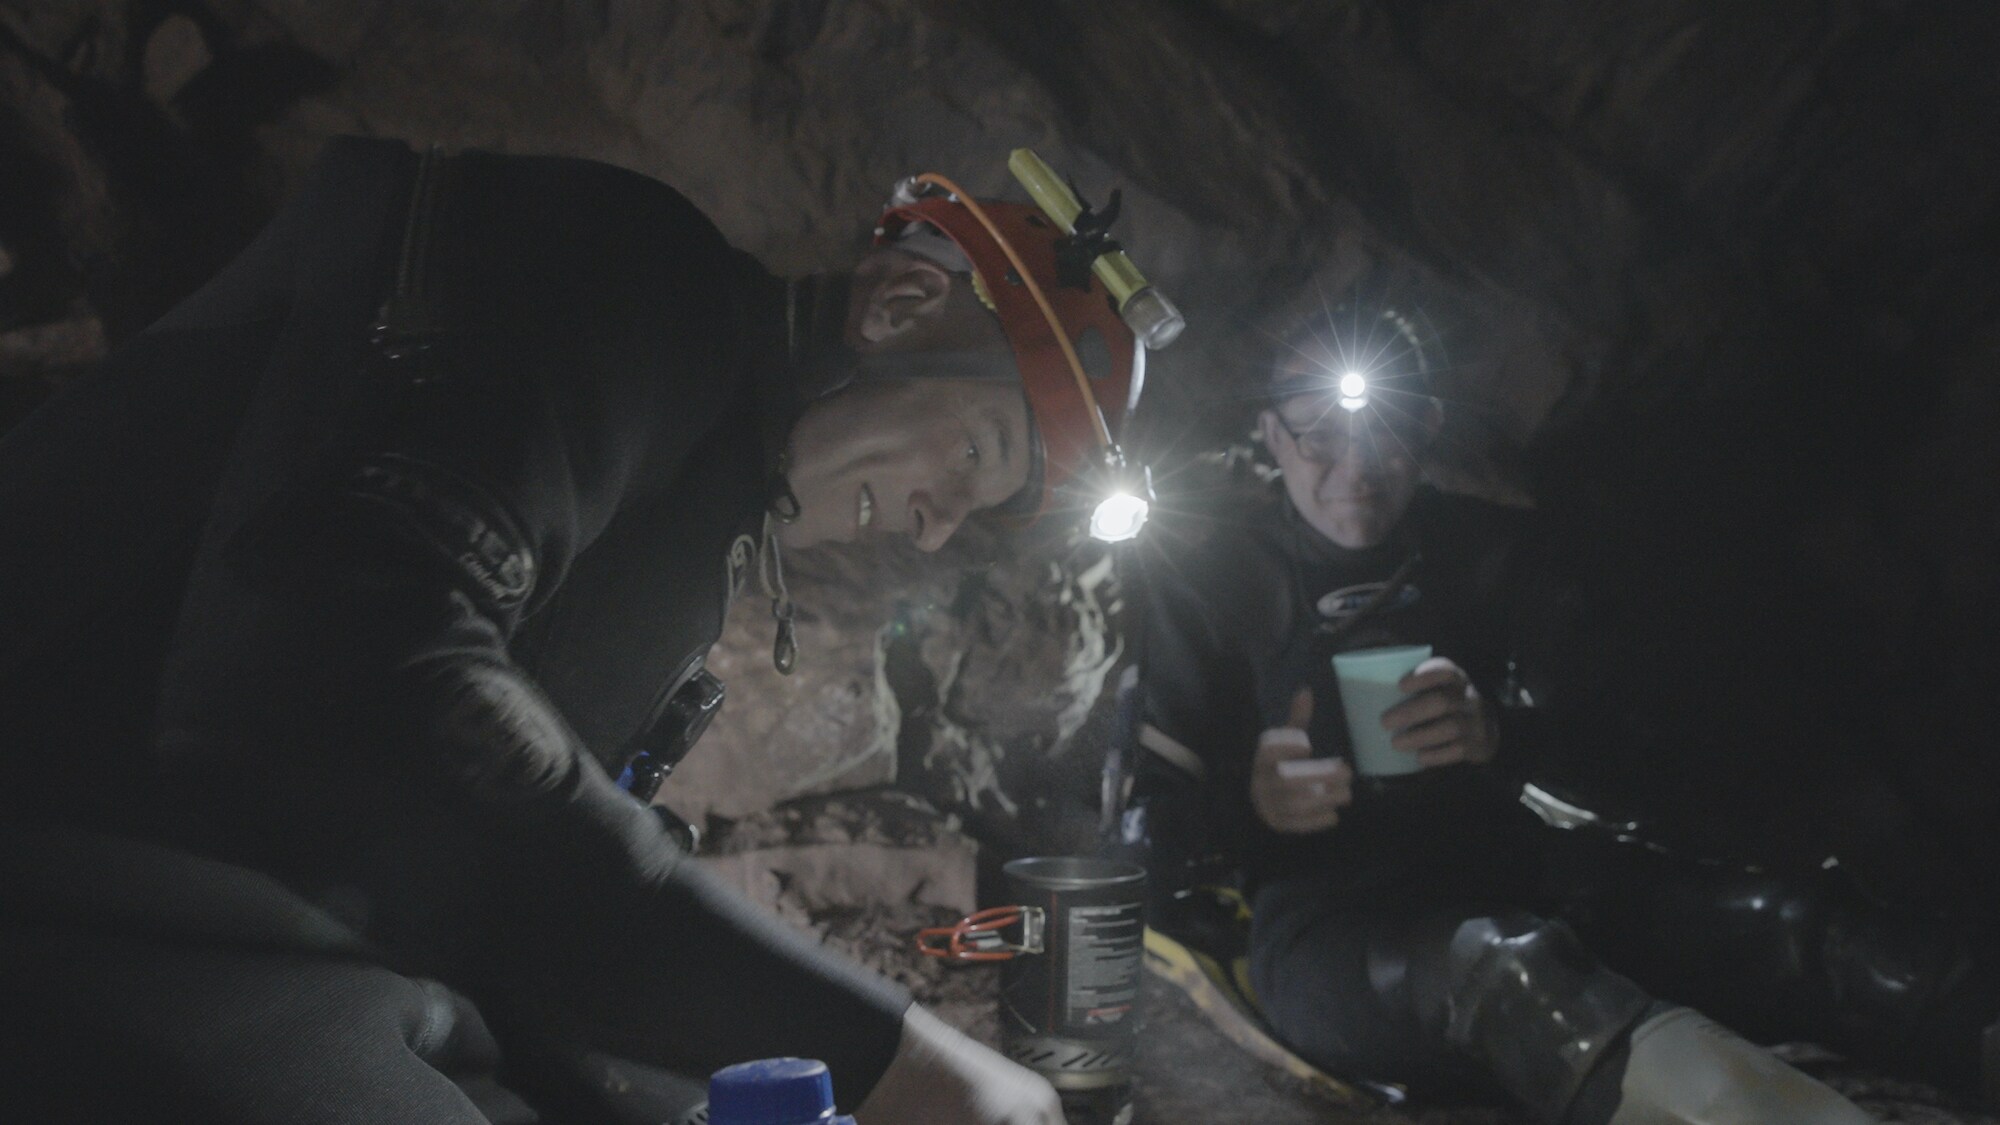 Cave divers Rick Stanton and John Volanthen inside cave.  THE RESCUE chronicles the 2018 rescue of 12 Thai boys and their soccer coach, trapped deep inside a flooded cave. E. Chai Vasarhelyi and Jimmy Chin reveal the perilous world of cave diving, bravery of the rescuers, and dedication of a community that made great sacrifices to save these young boys. (Credit: National Geographic)